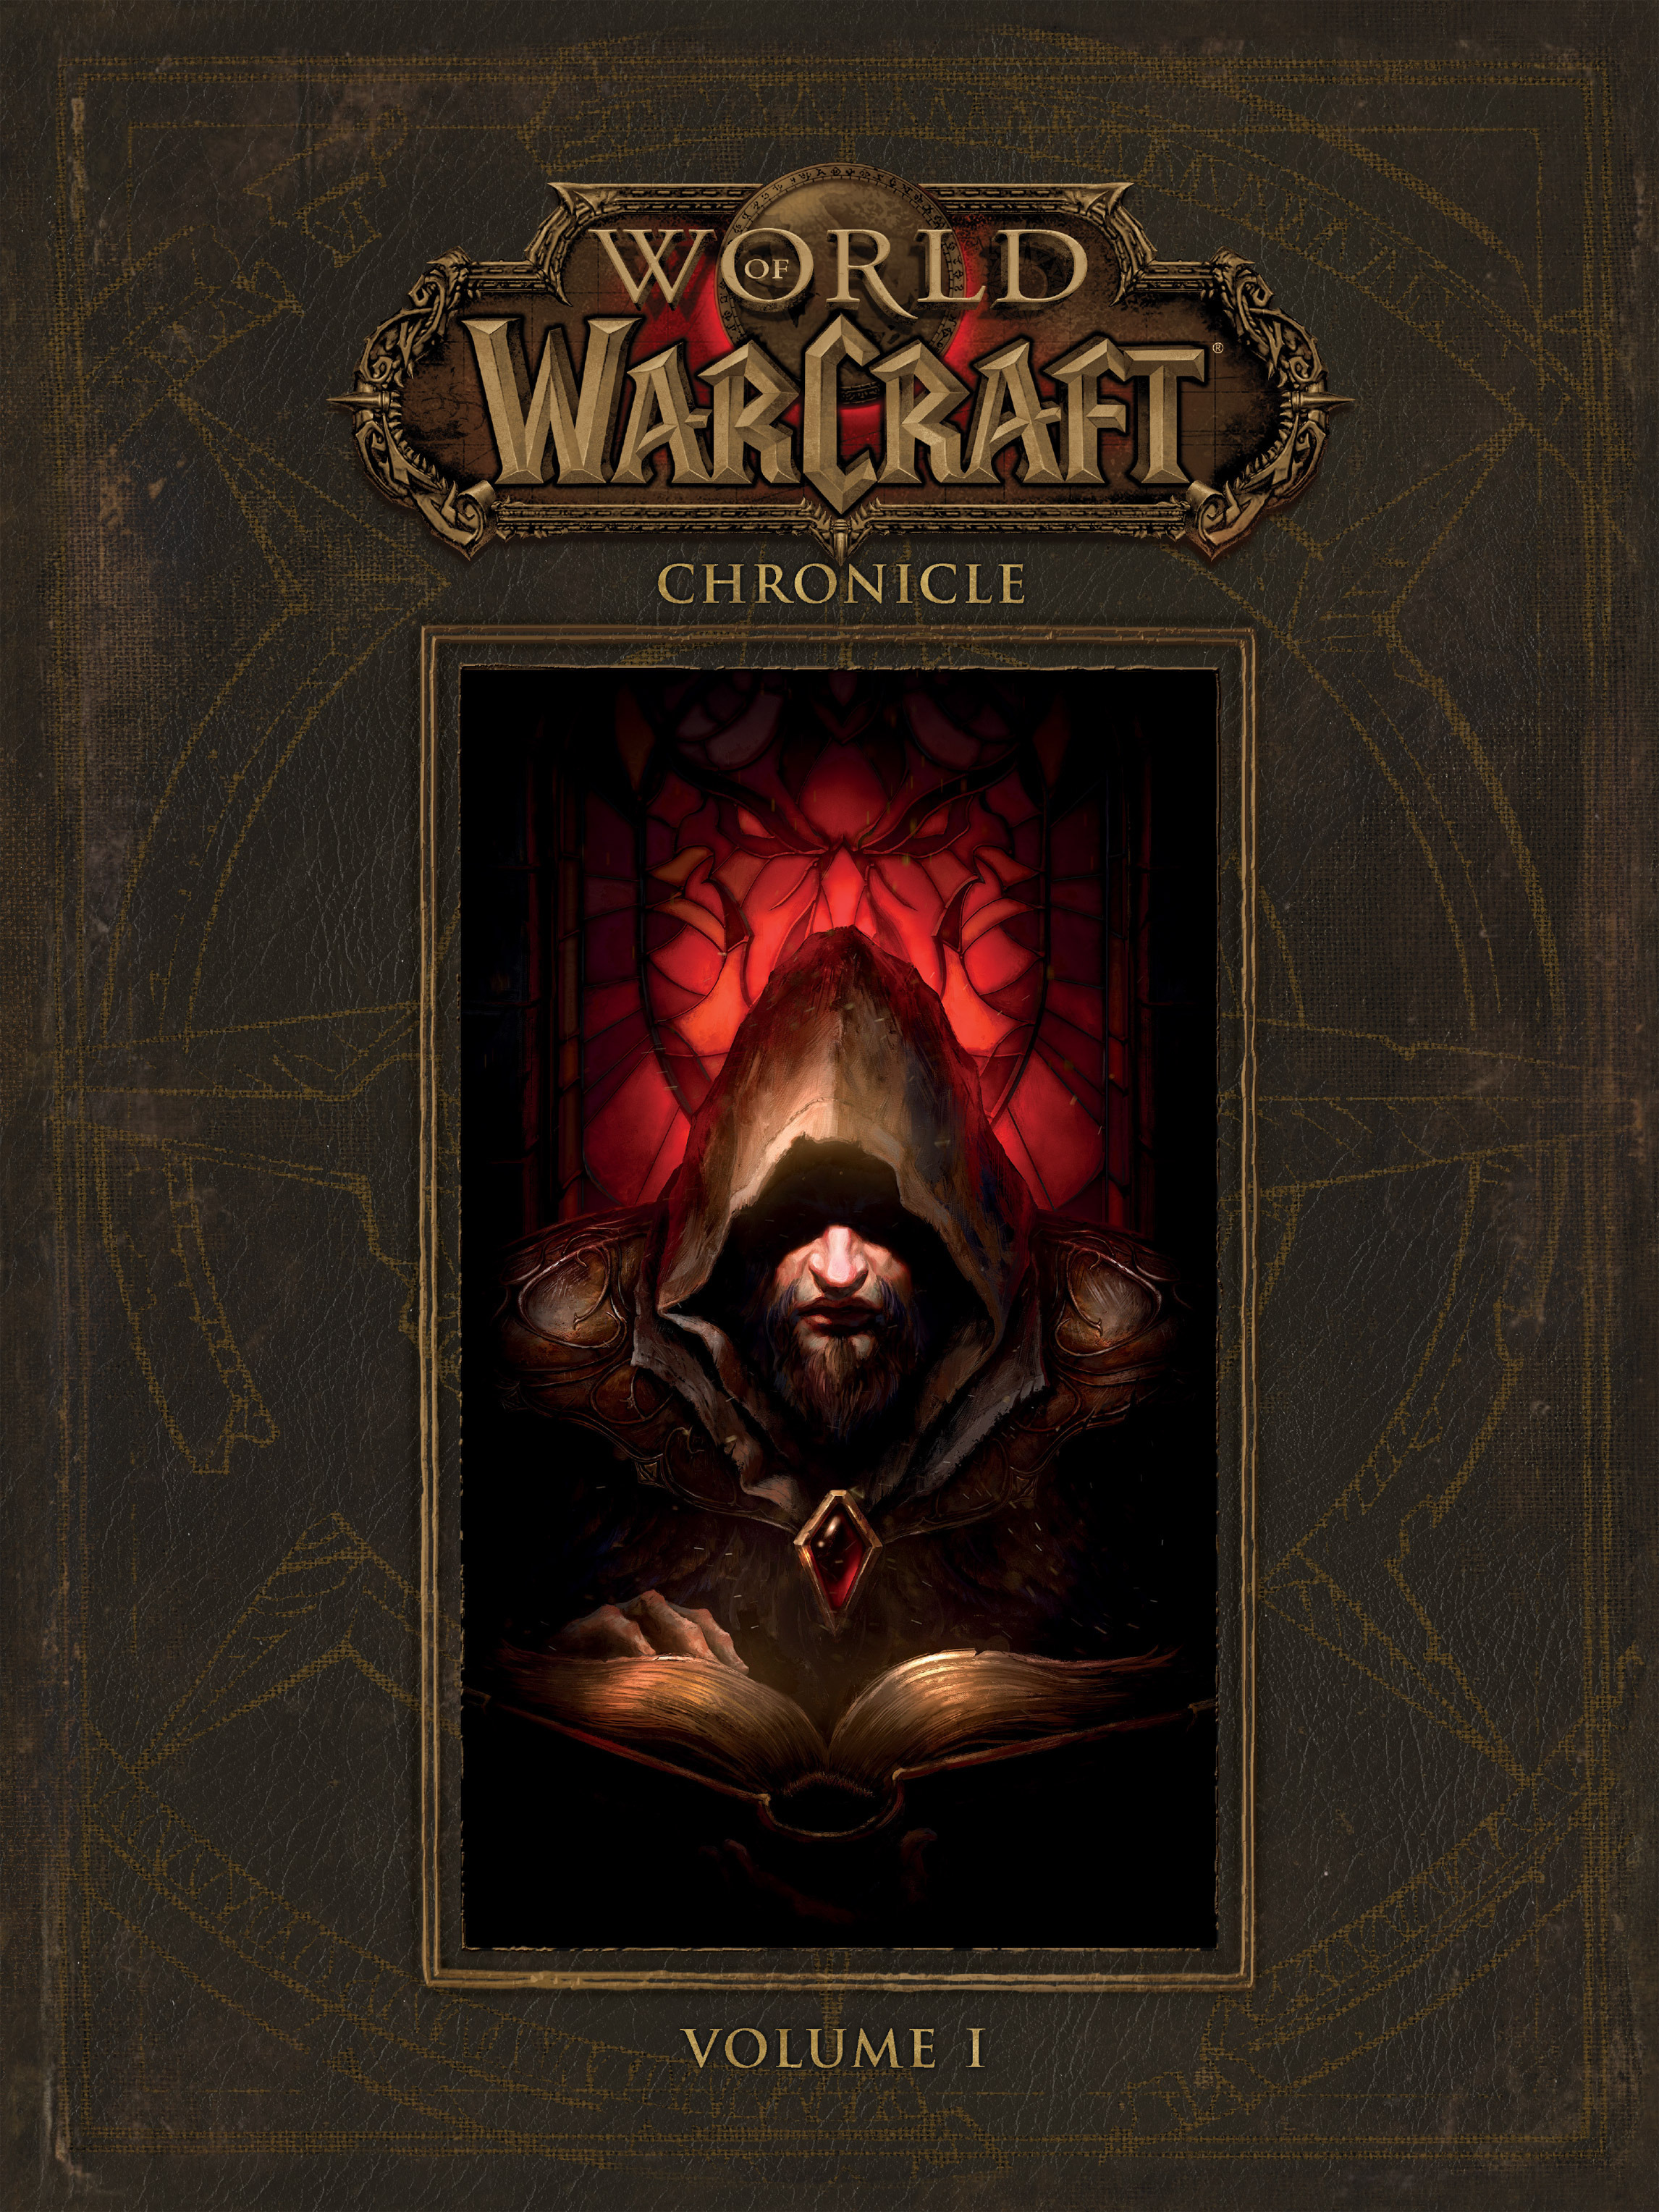 Read online World of Warcraft Chronicle Vol. 1 comic -  Issue # Full - 1